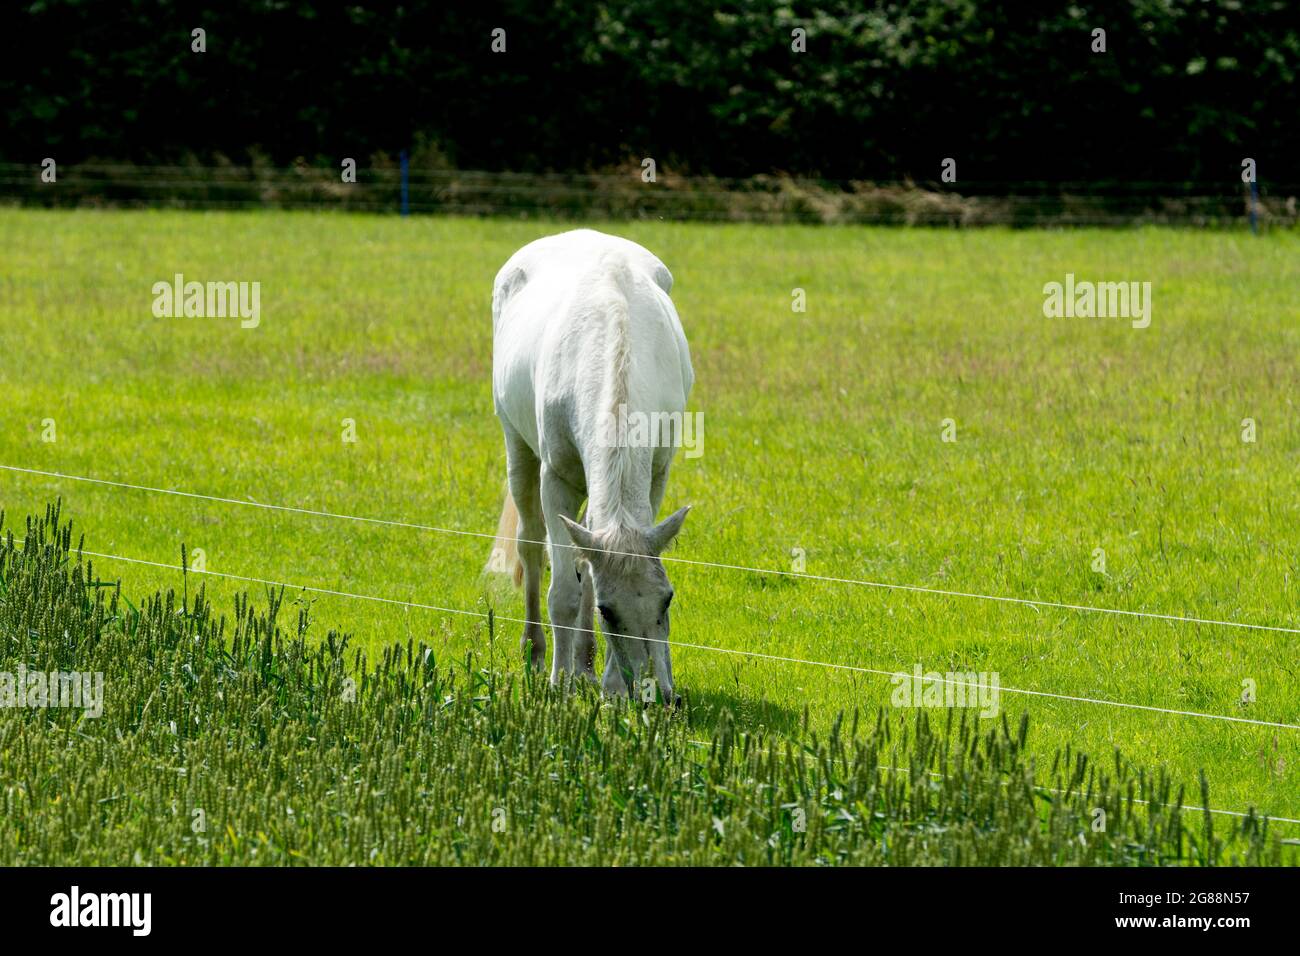 Grey horse in a field surrounded by an electric fence, UK Stock Photo